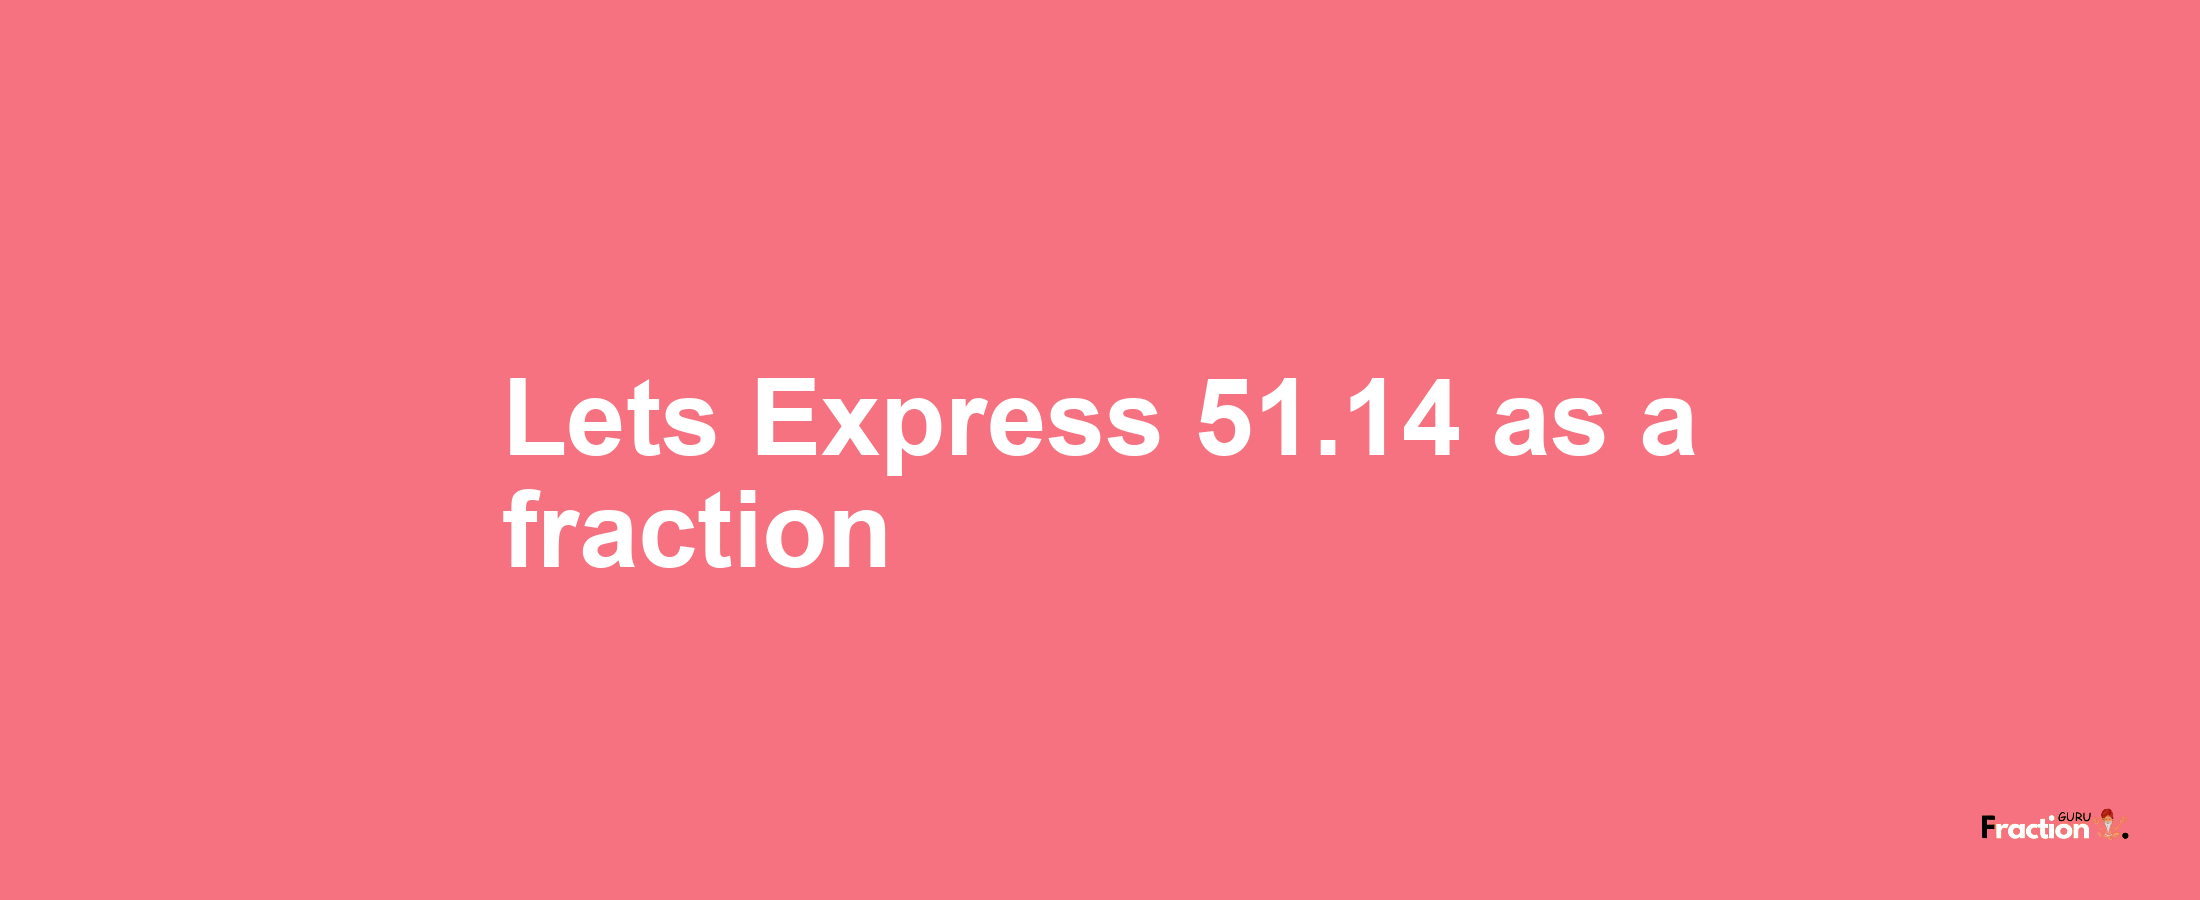 Lets Express 51.14 as afraction